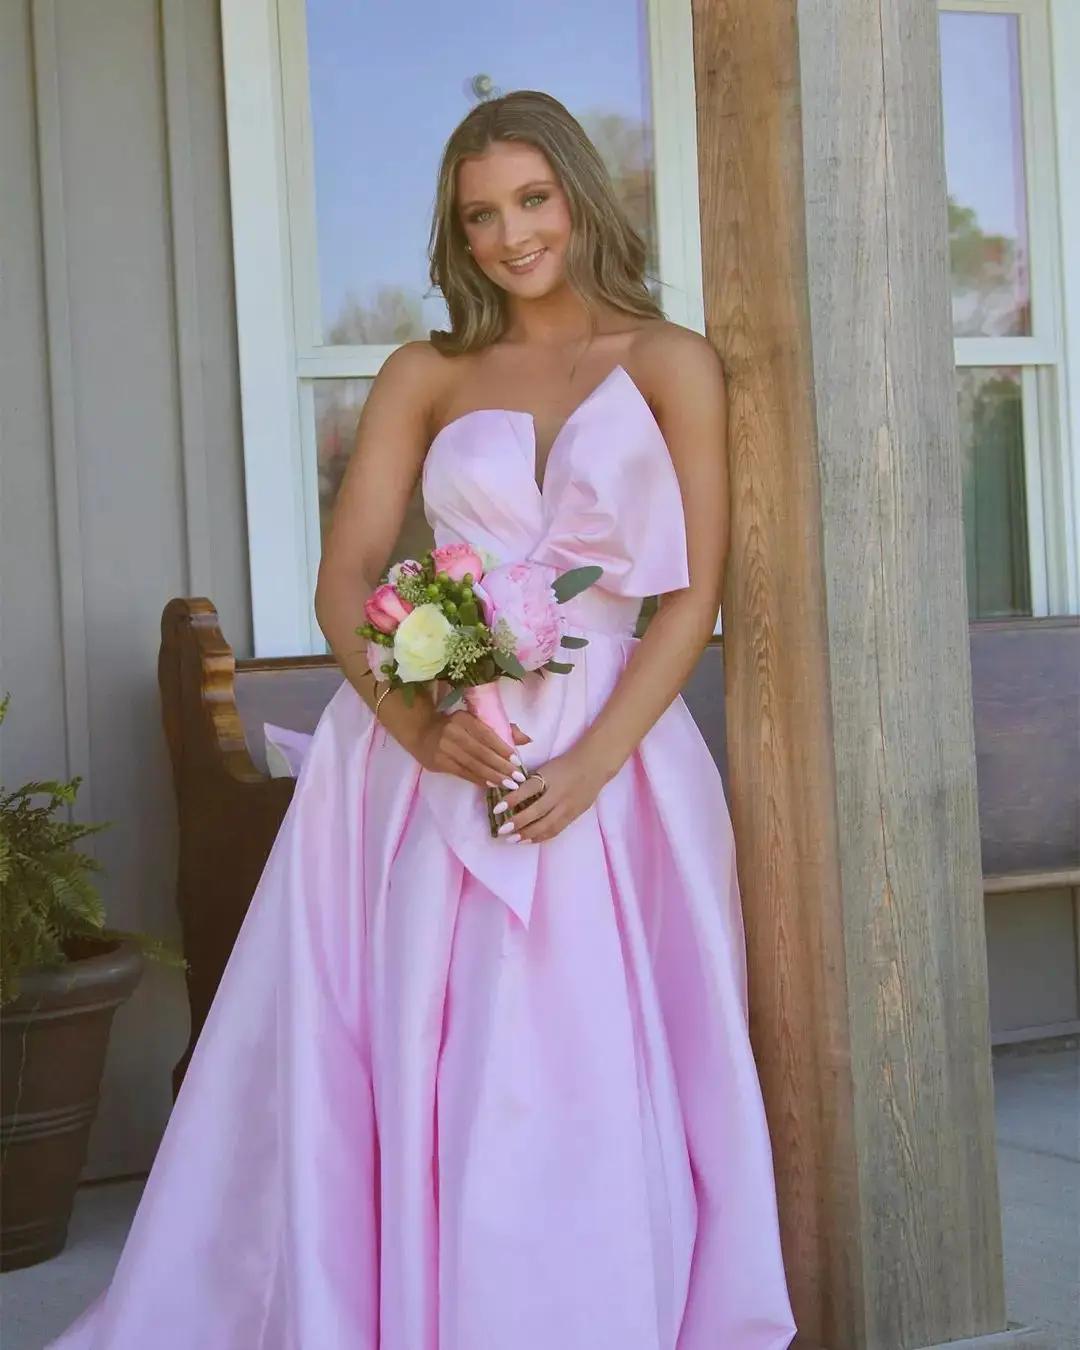 girl at prom in pink dress